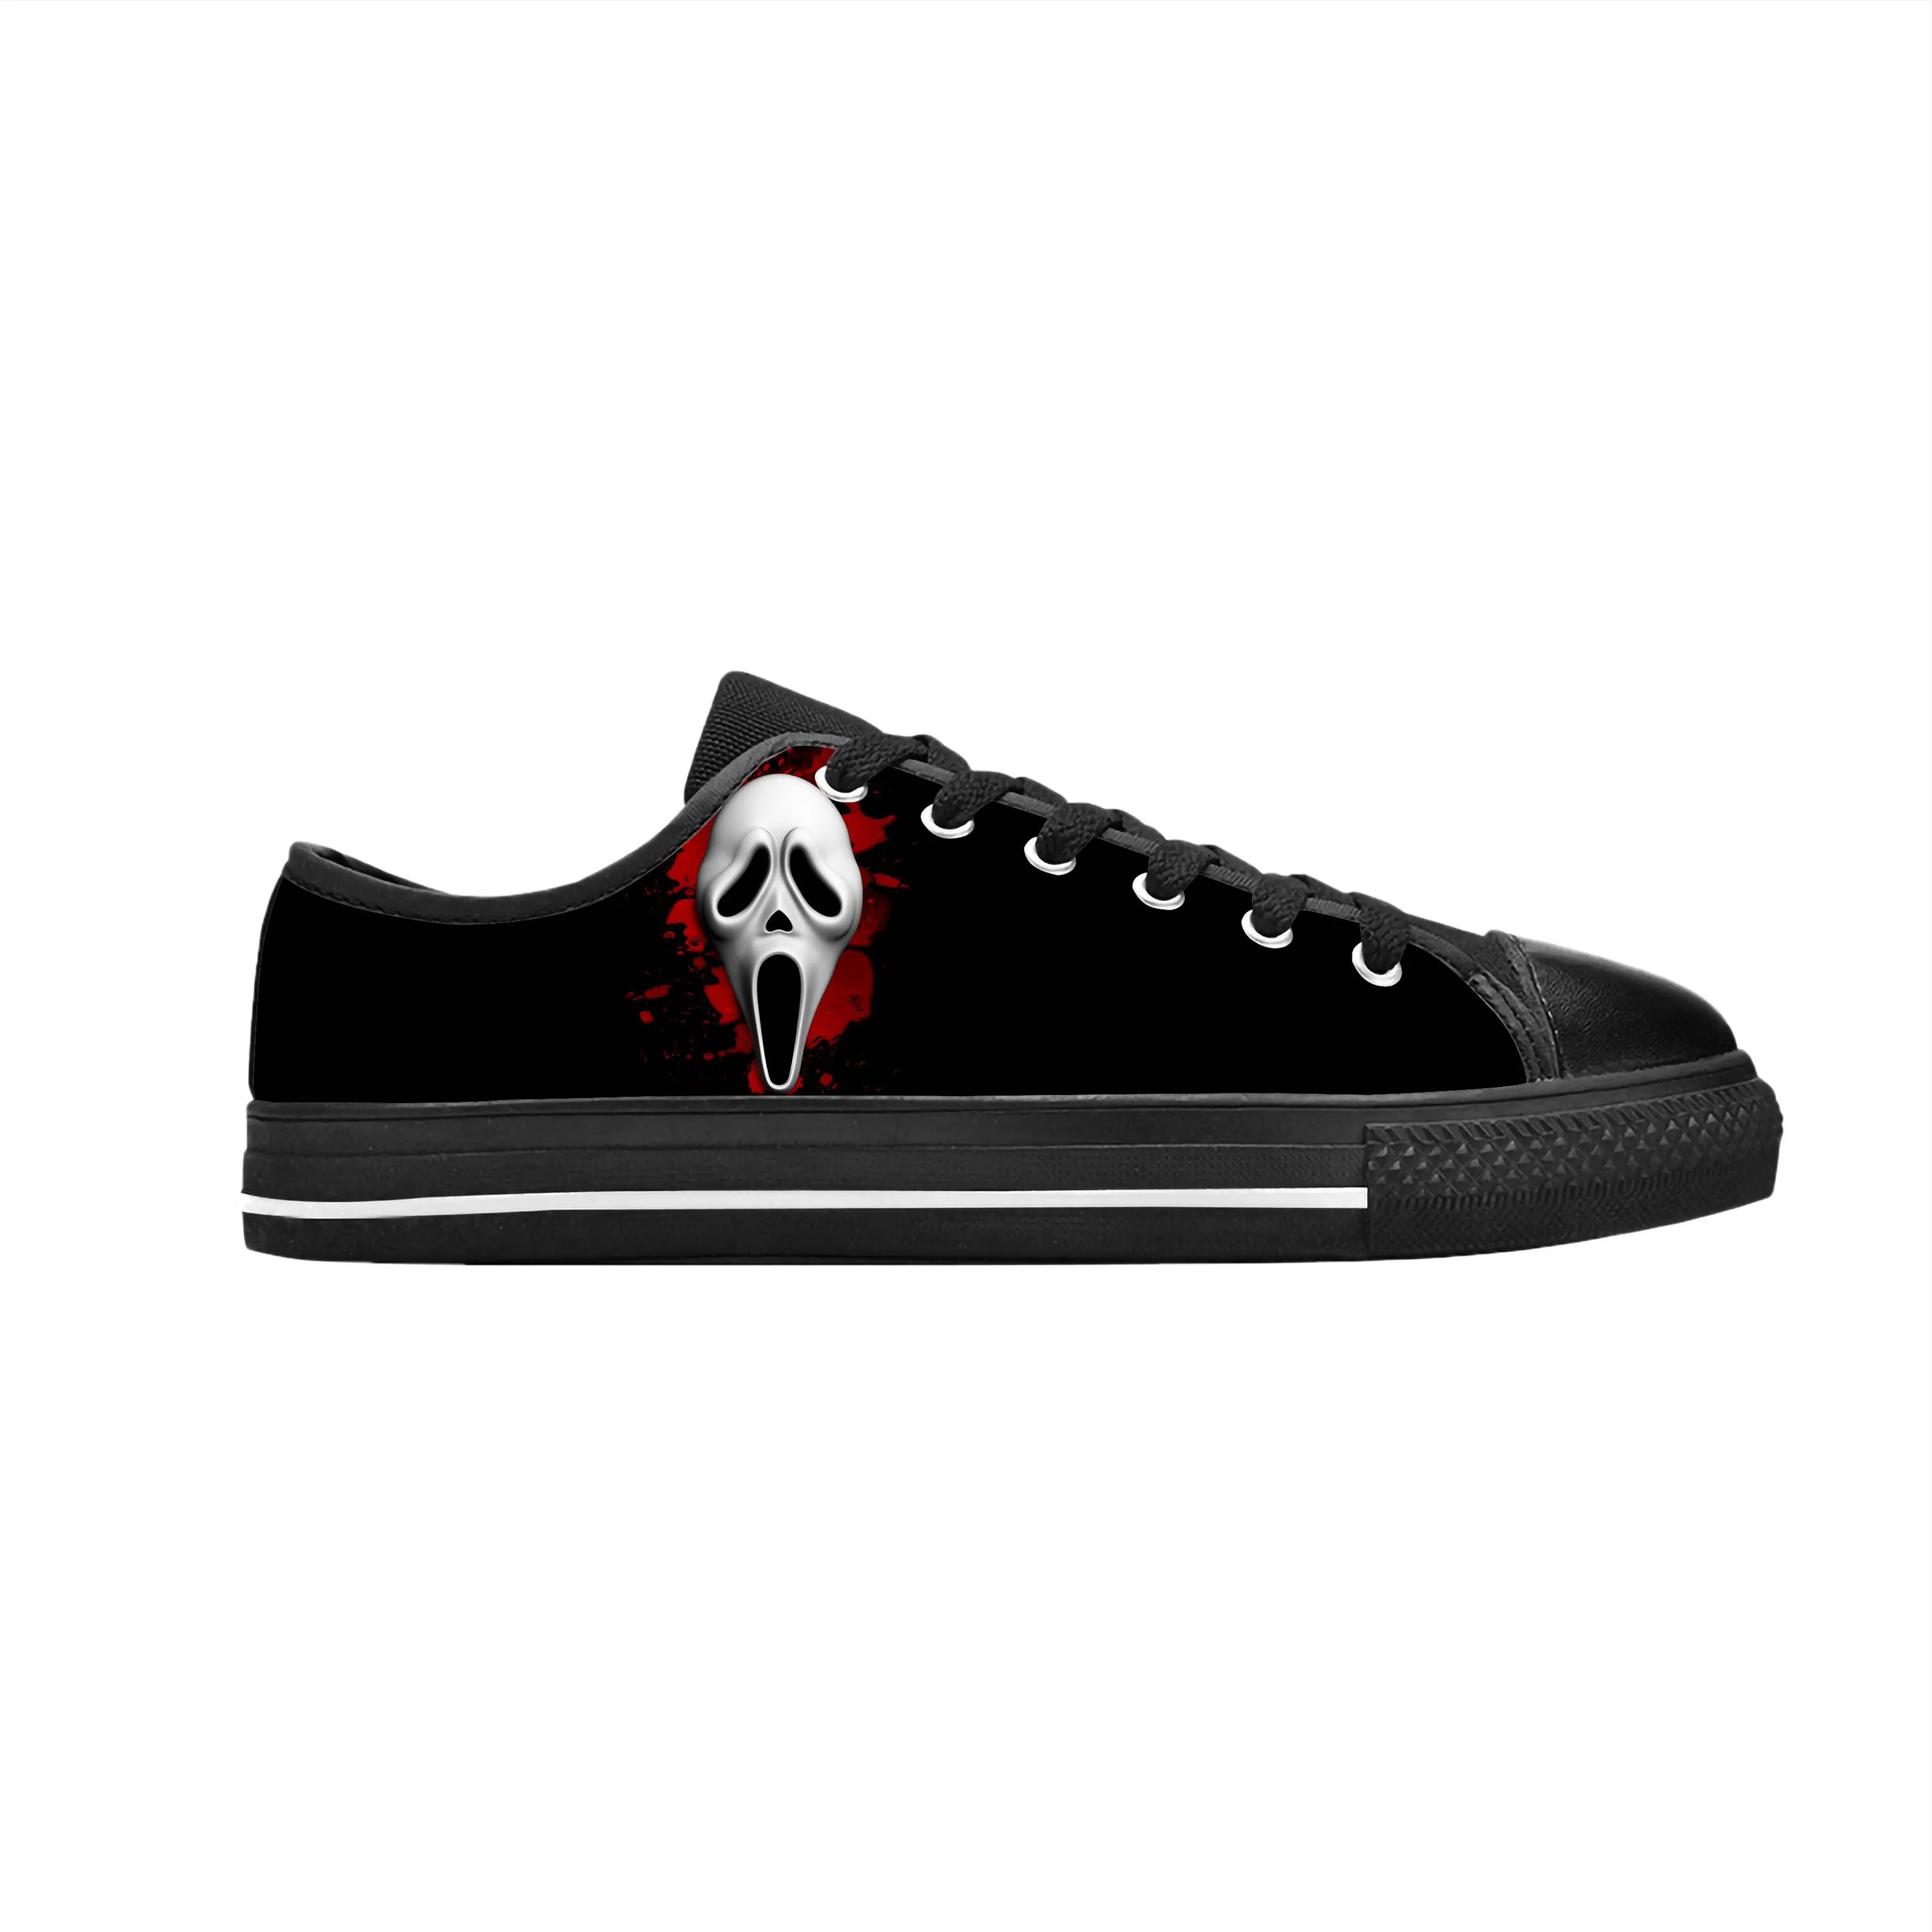 

Scream Ghostface Ghost Face Horror Scary Halloween Casual Cloth Shoes Low Top Comfortable Breathable 3D Print Men Women Sneakers